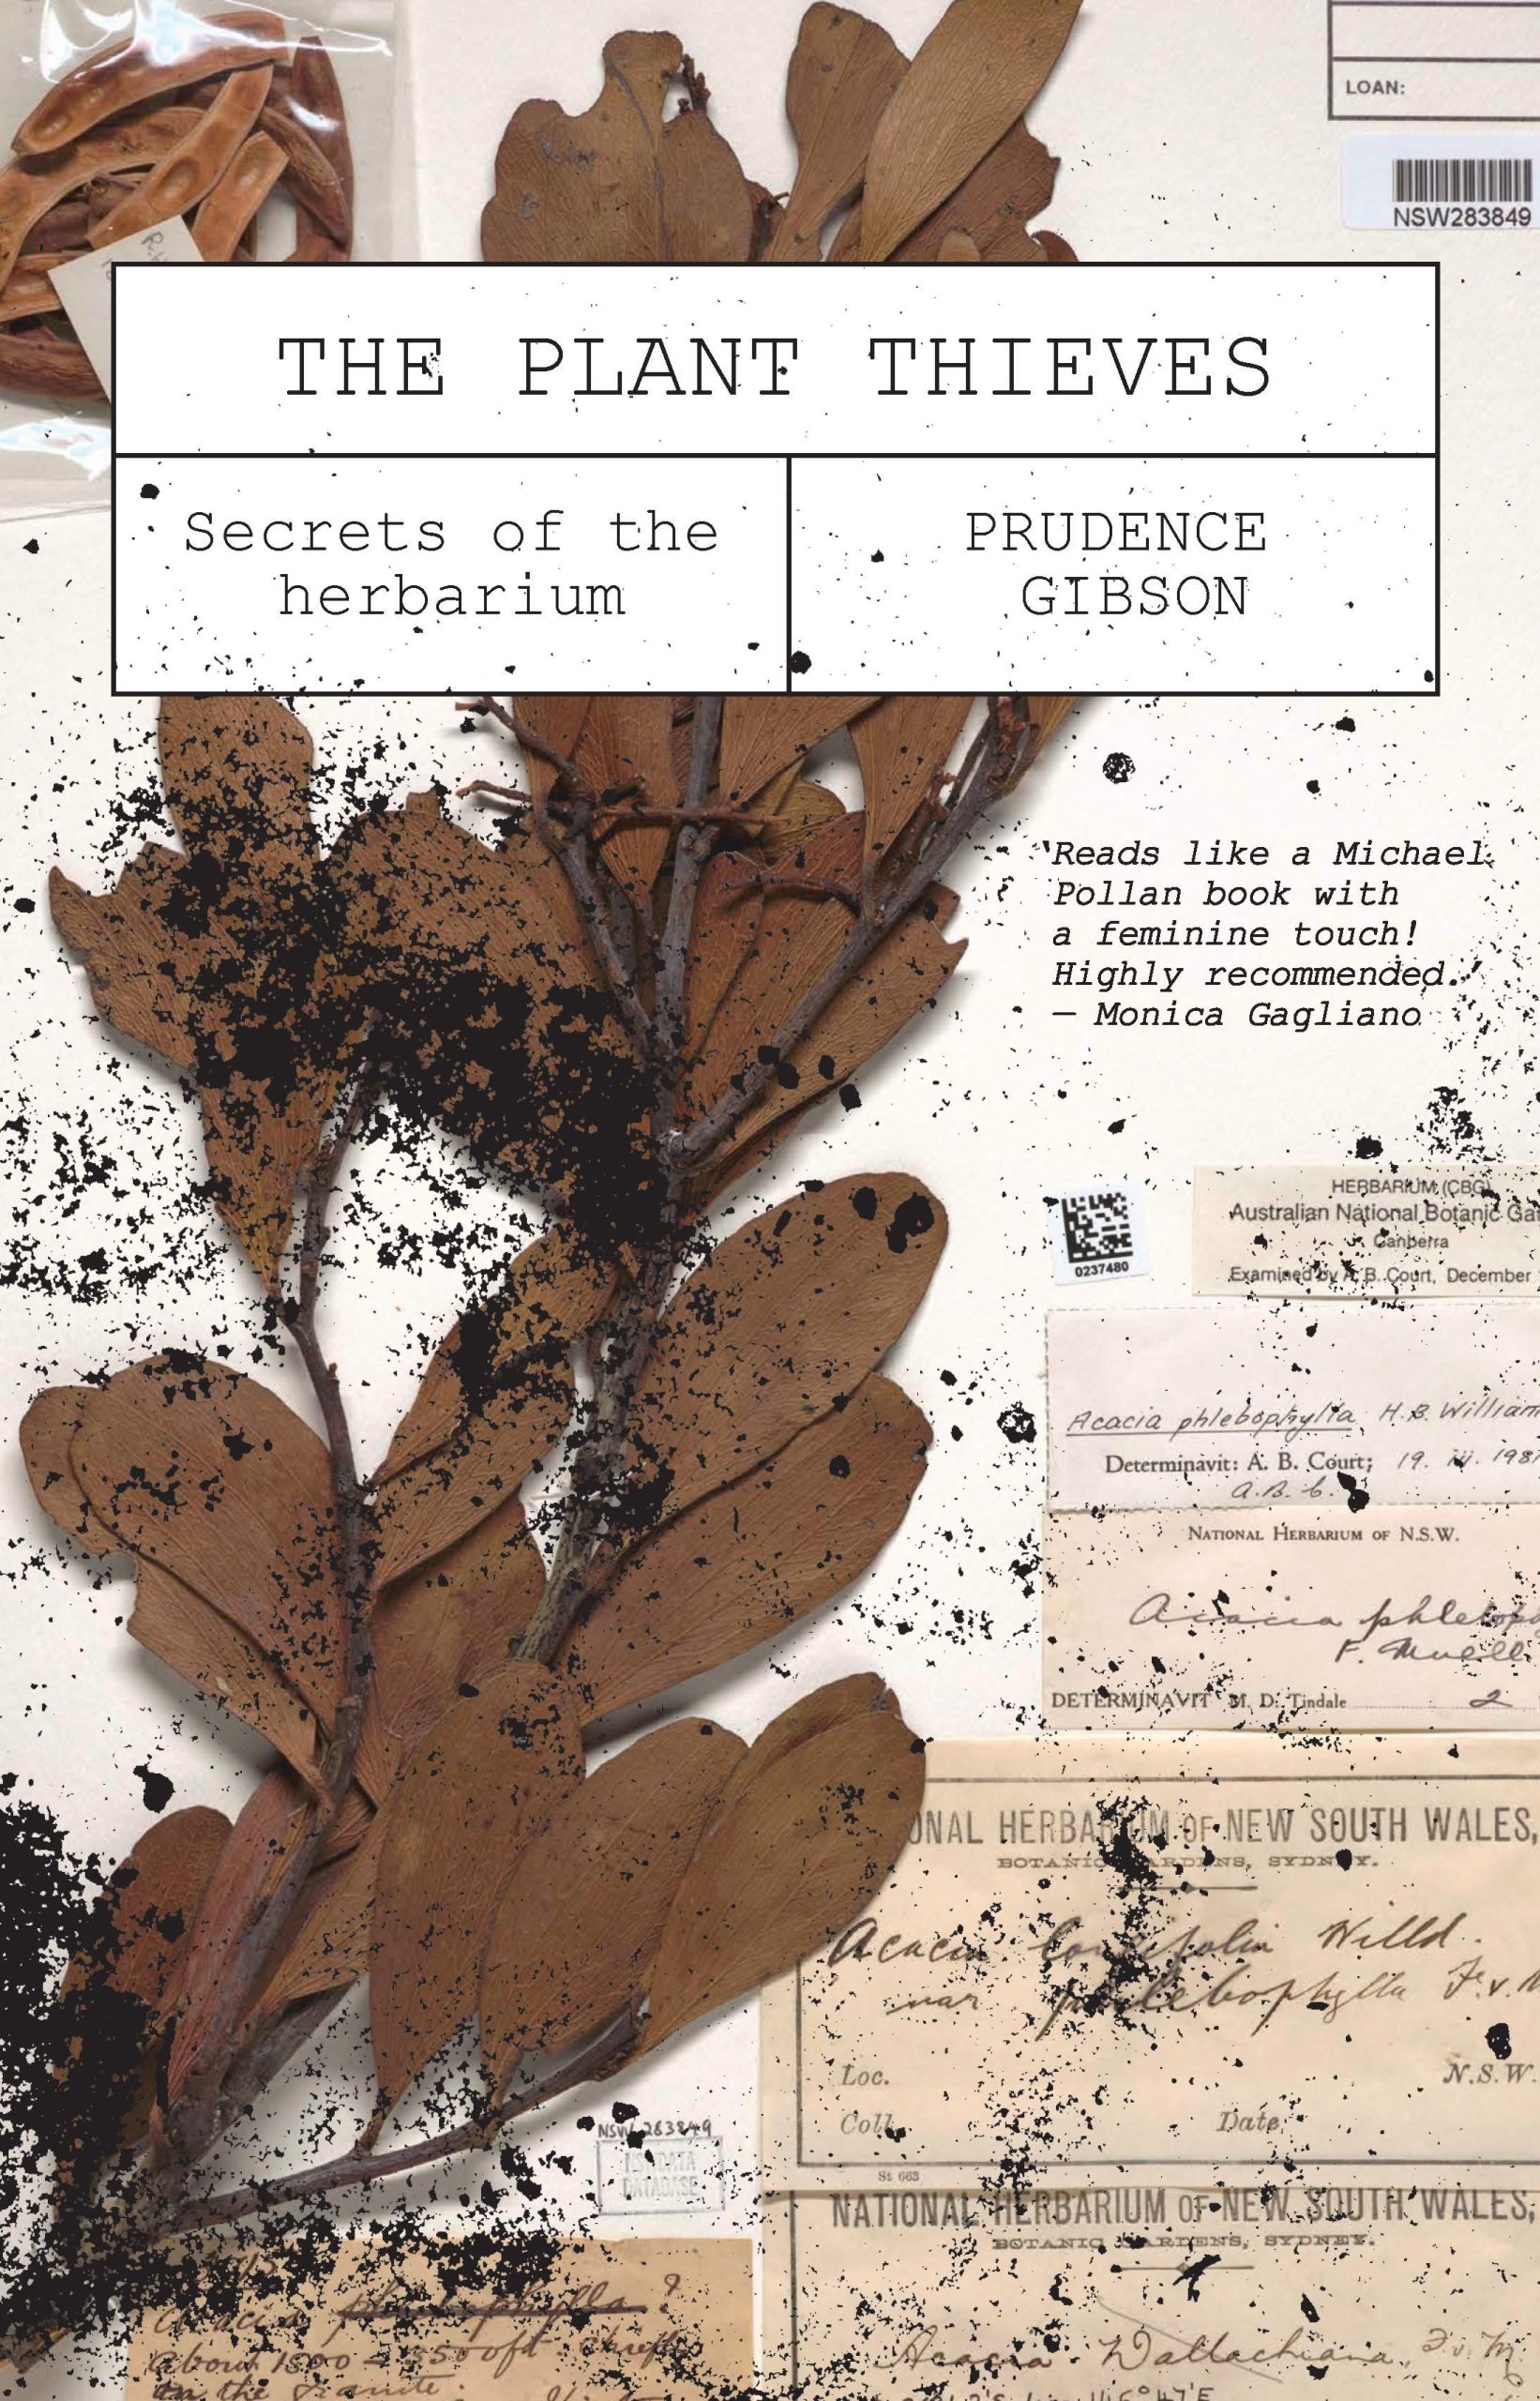 The front cover of Prudence Gibson's book, The Plant Thieves: Secrets of the herbarium